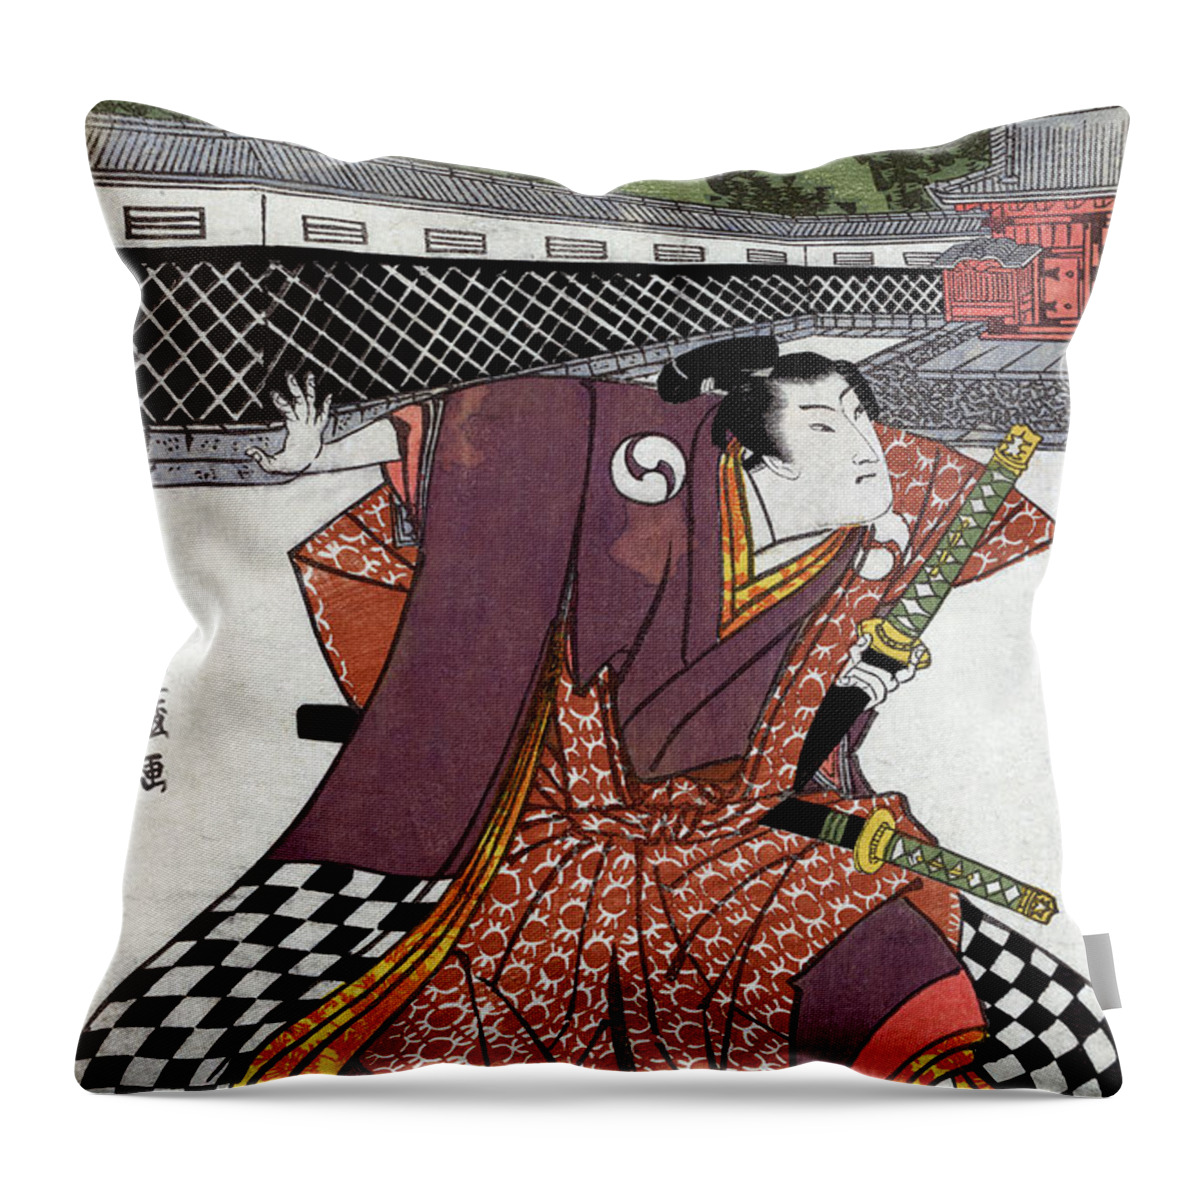 Military Throw Pillow featuring the photograph Samurai Warrior, 18th Century by Science Source